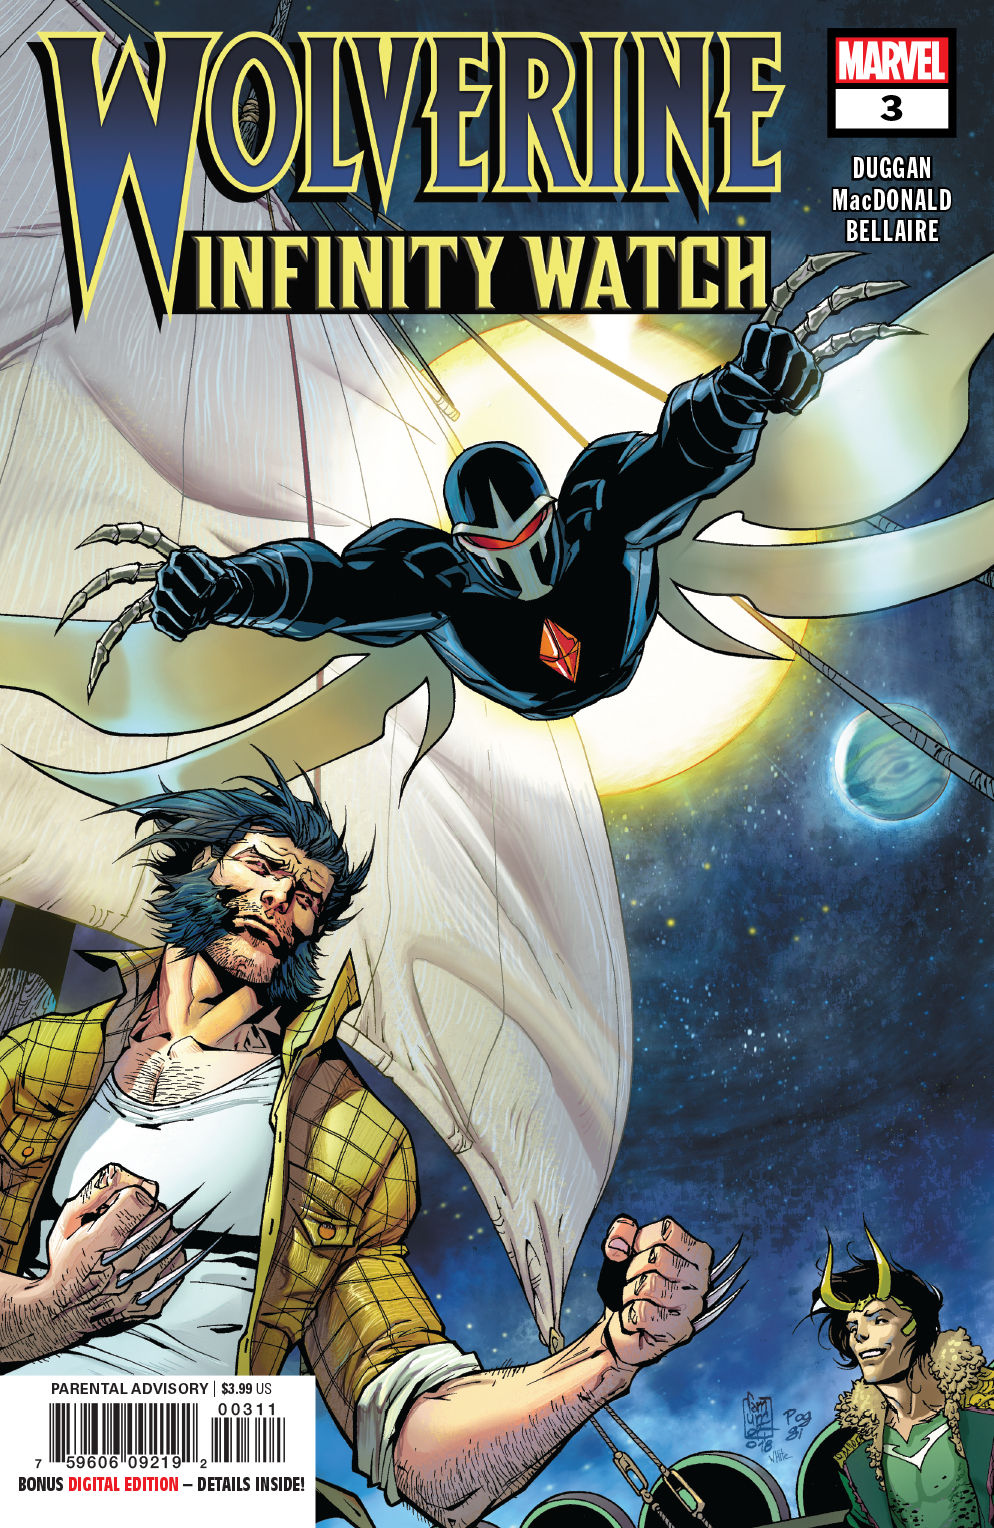 Wolverine: Infinity Watch no. 3 (3 of 5) (2019 Series)